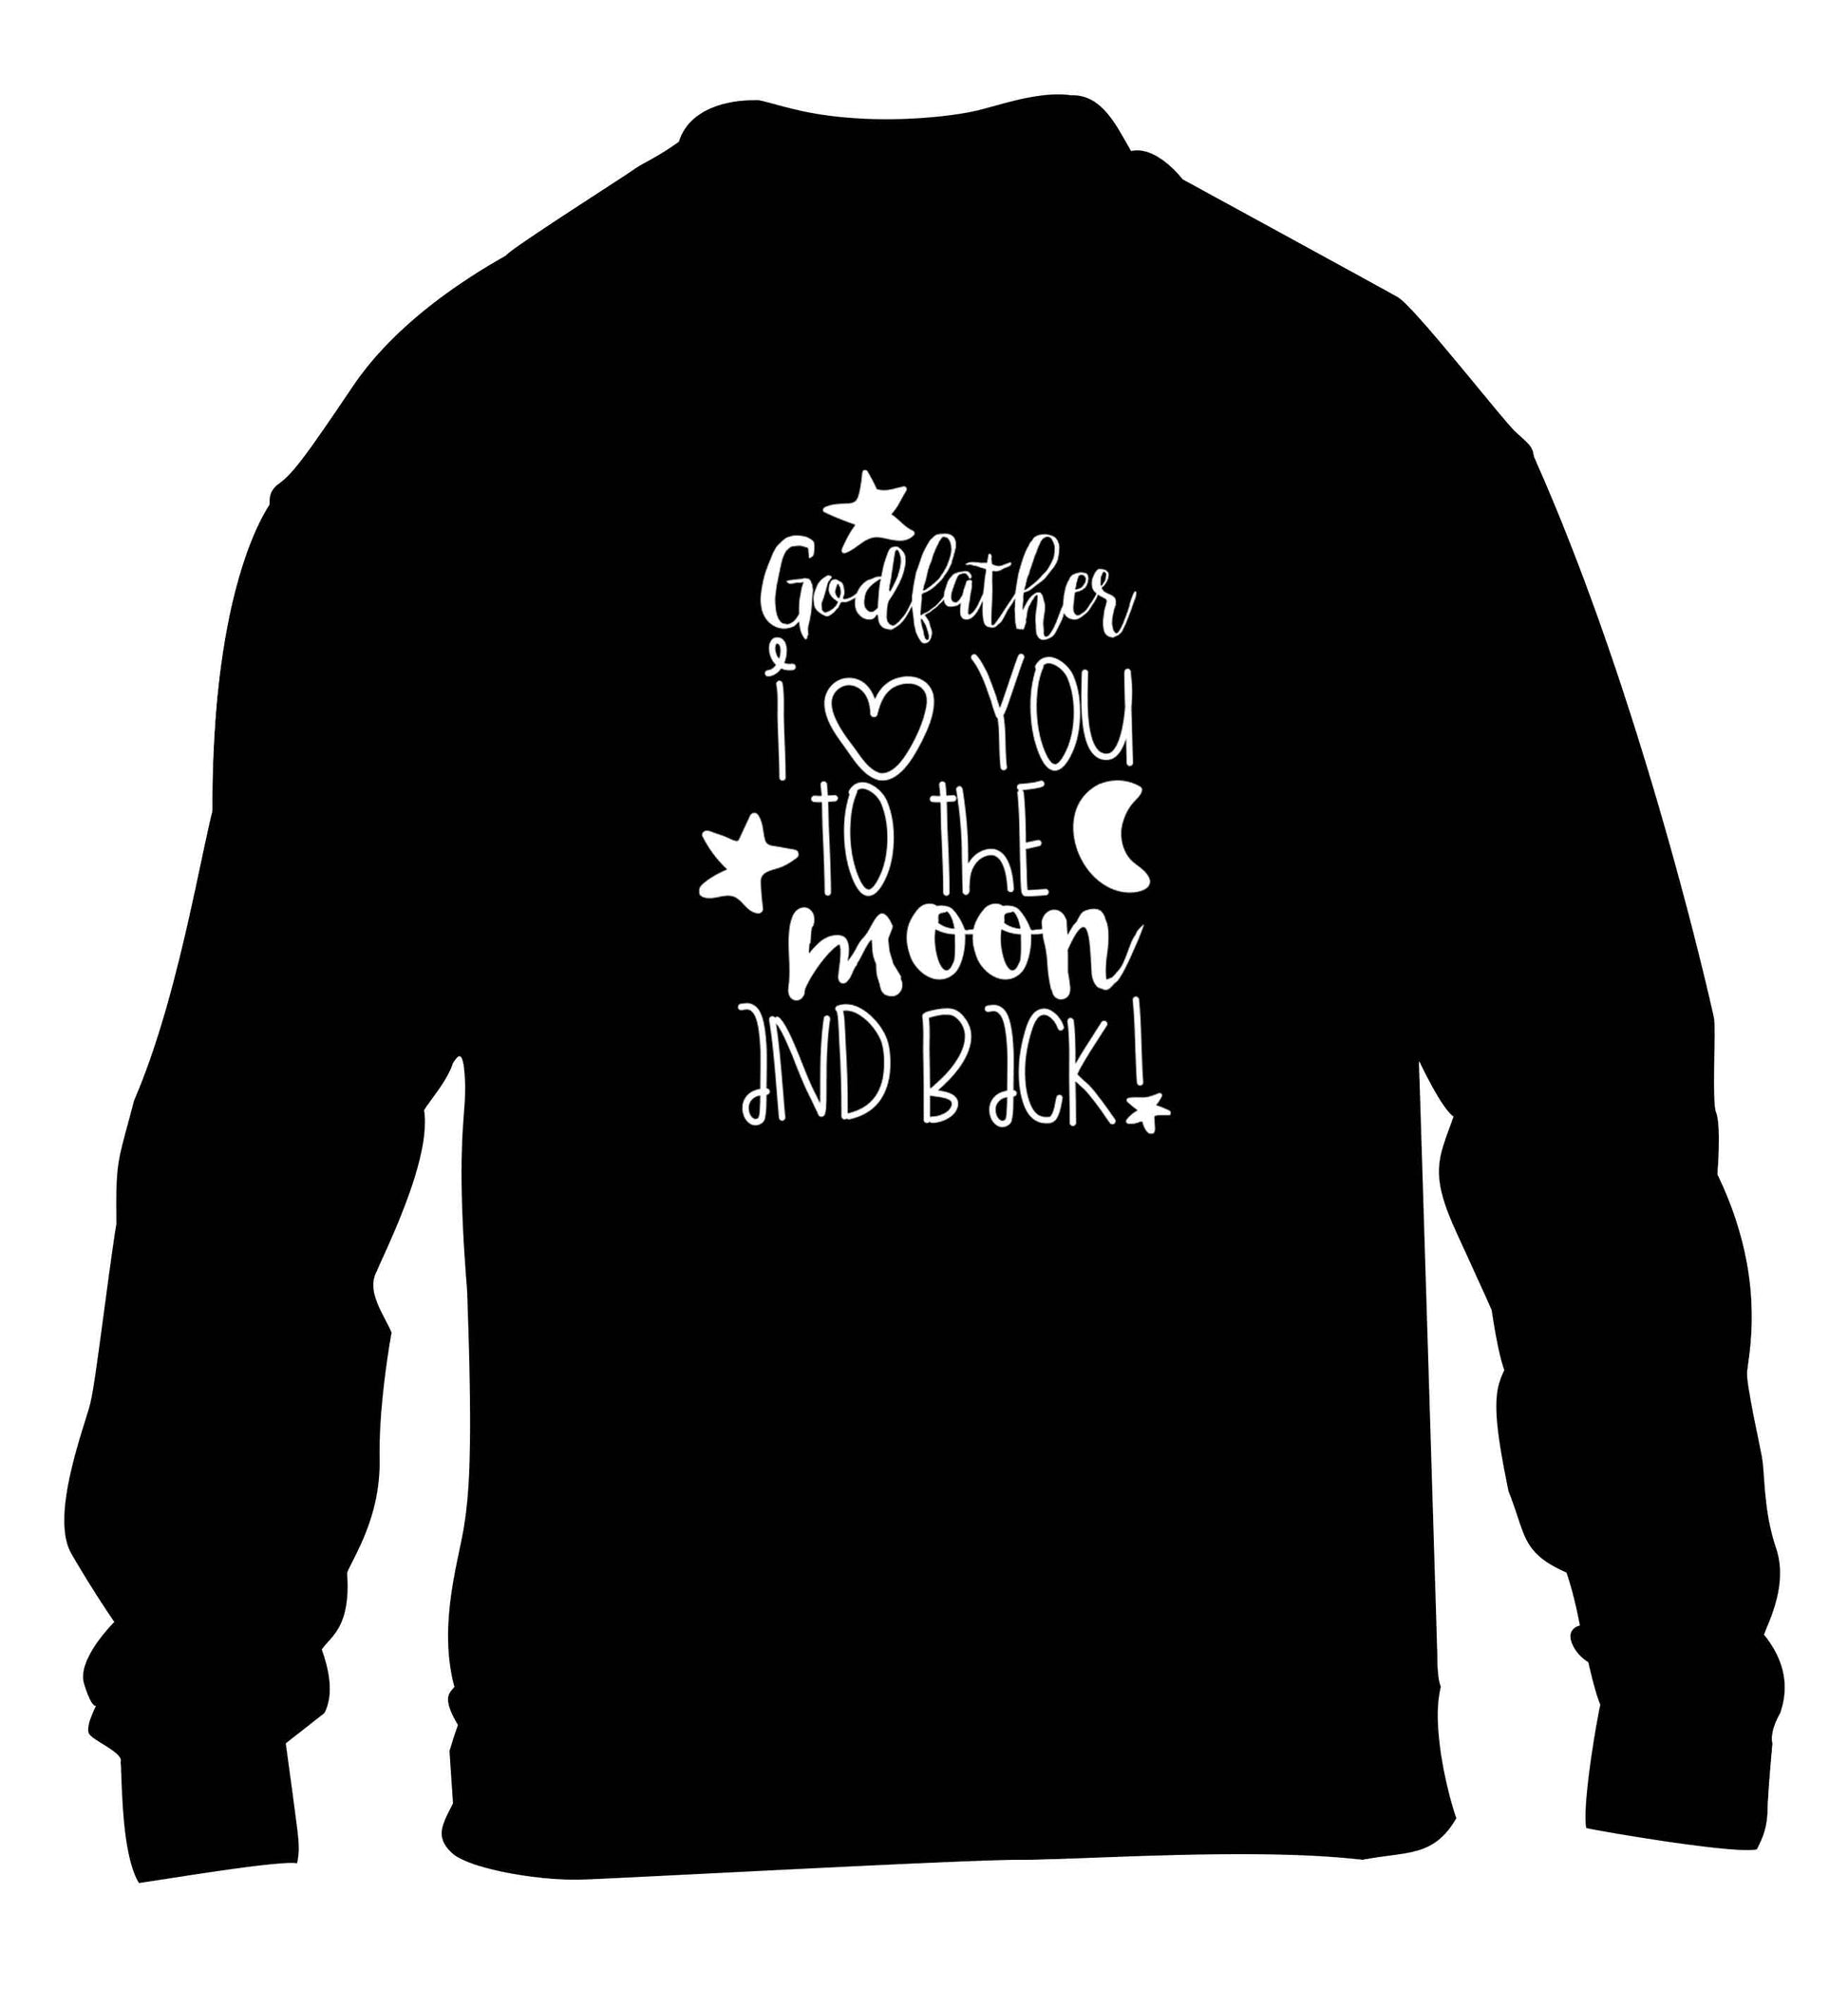 Godfather I love you to the moon and back children's black sweater 12-13 Years